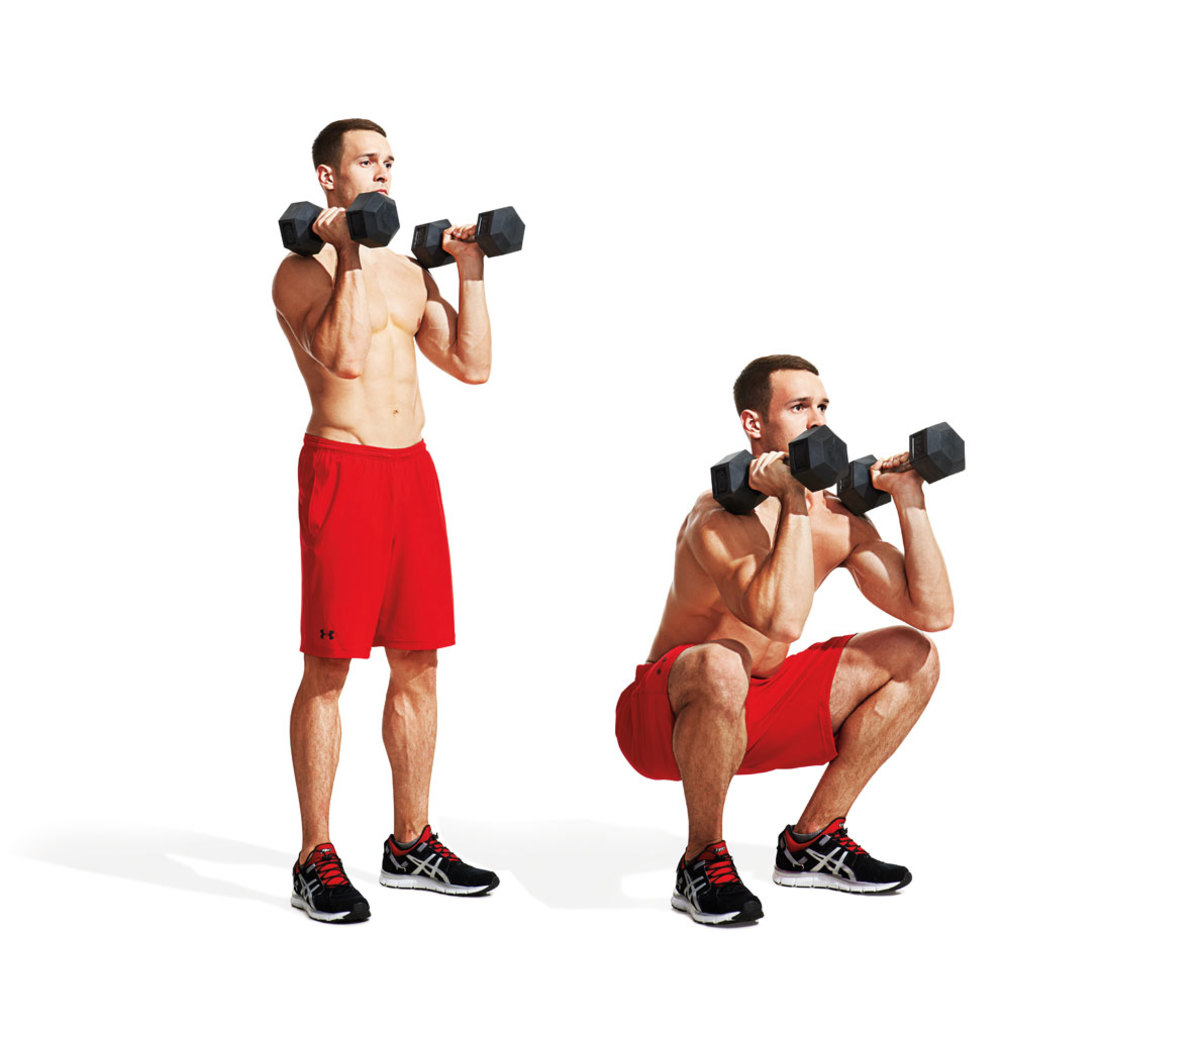 Best Well-Rounded Workout Routine for Men - Men's Journal